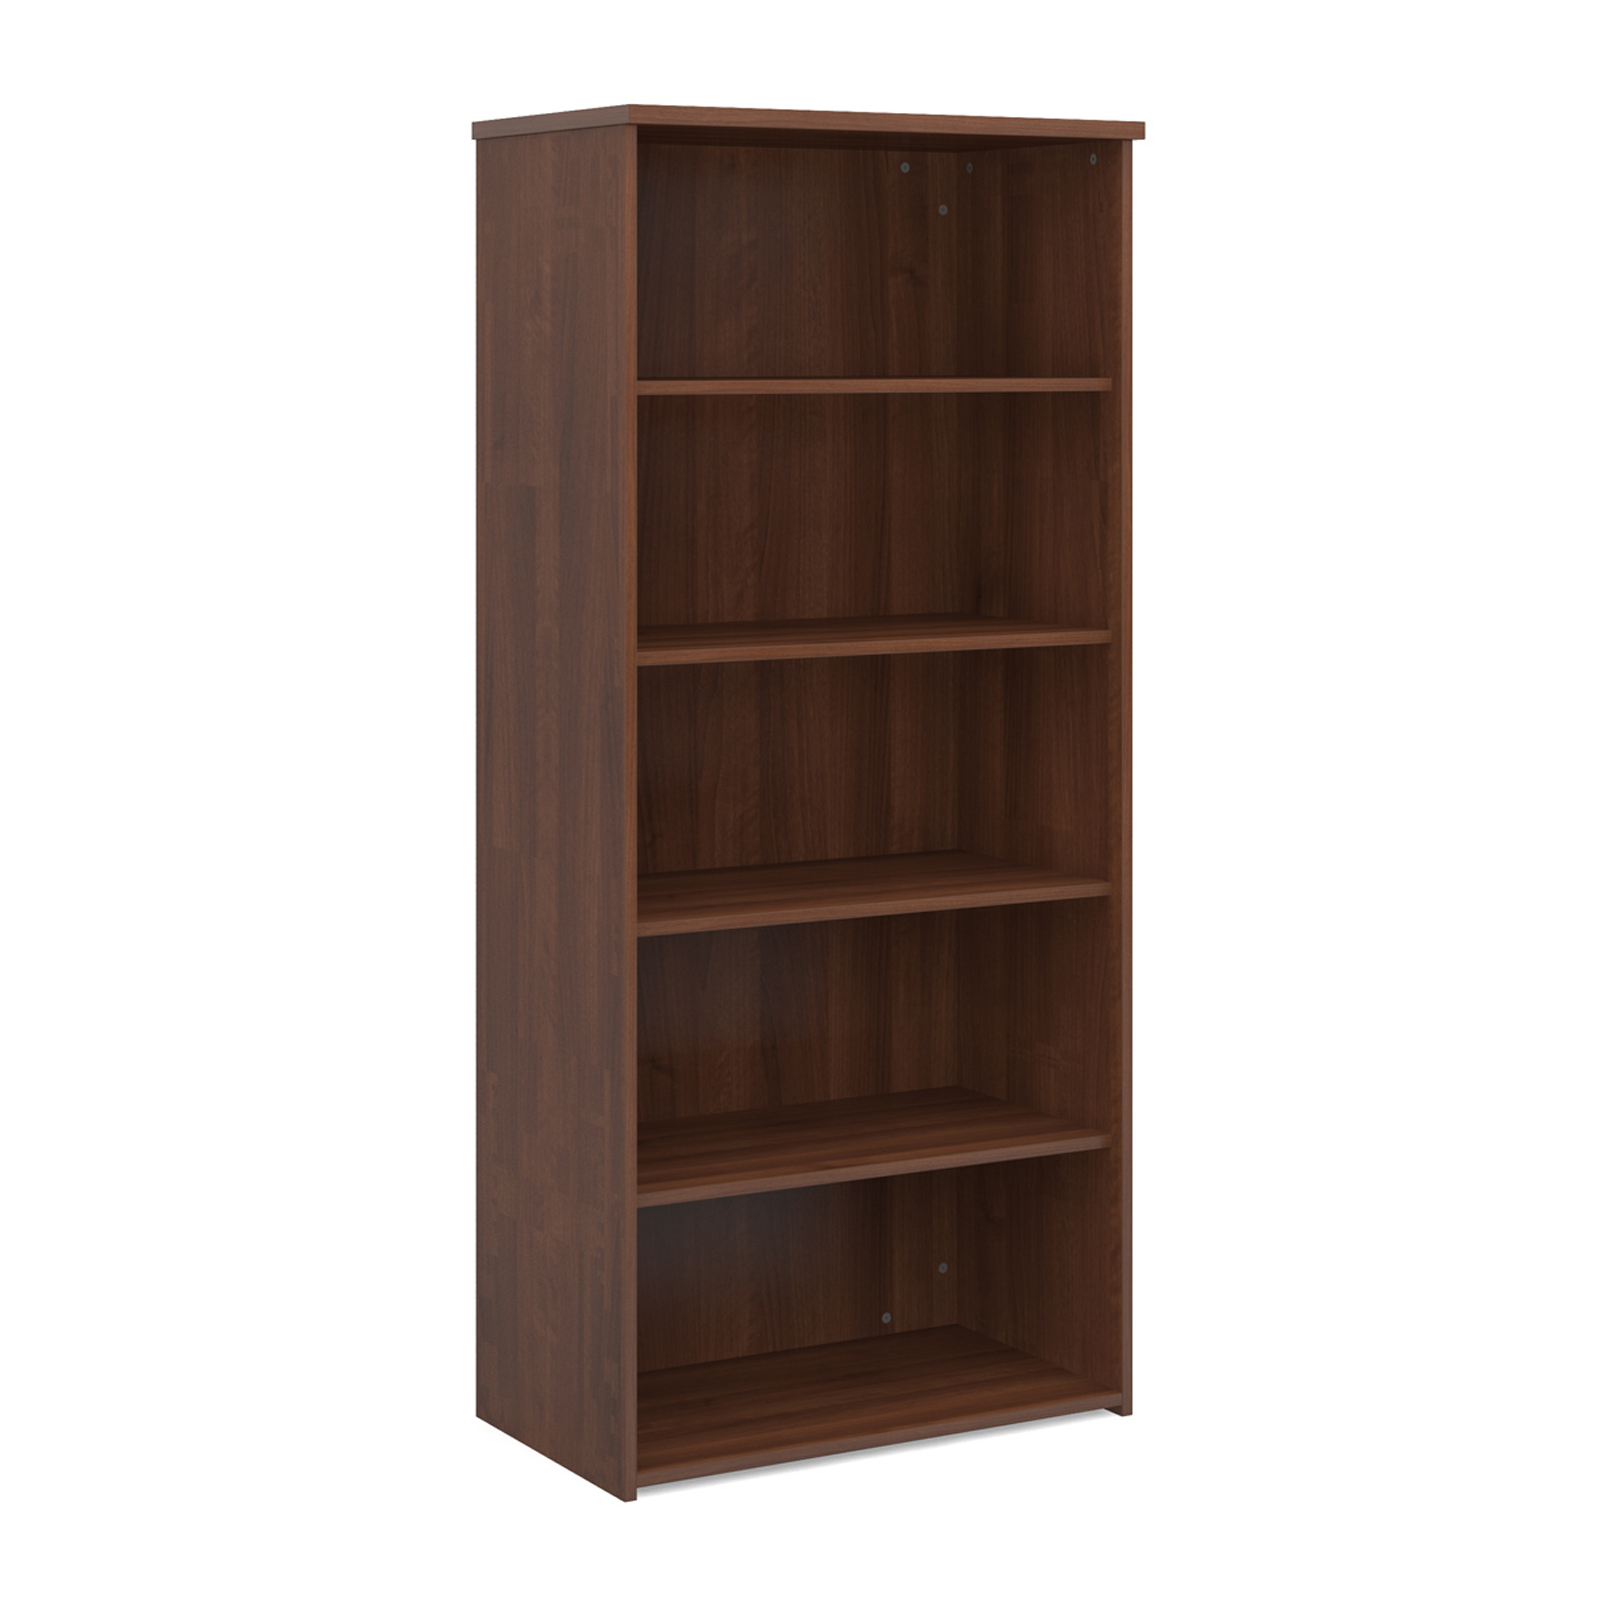 Over 1200mm High Universal bookcase 1790mm high with 4 shelves - walnut